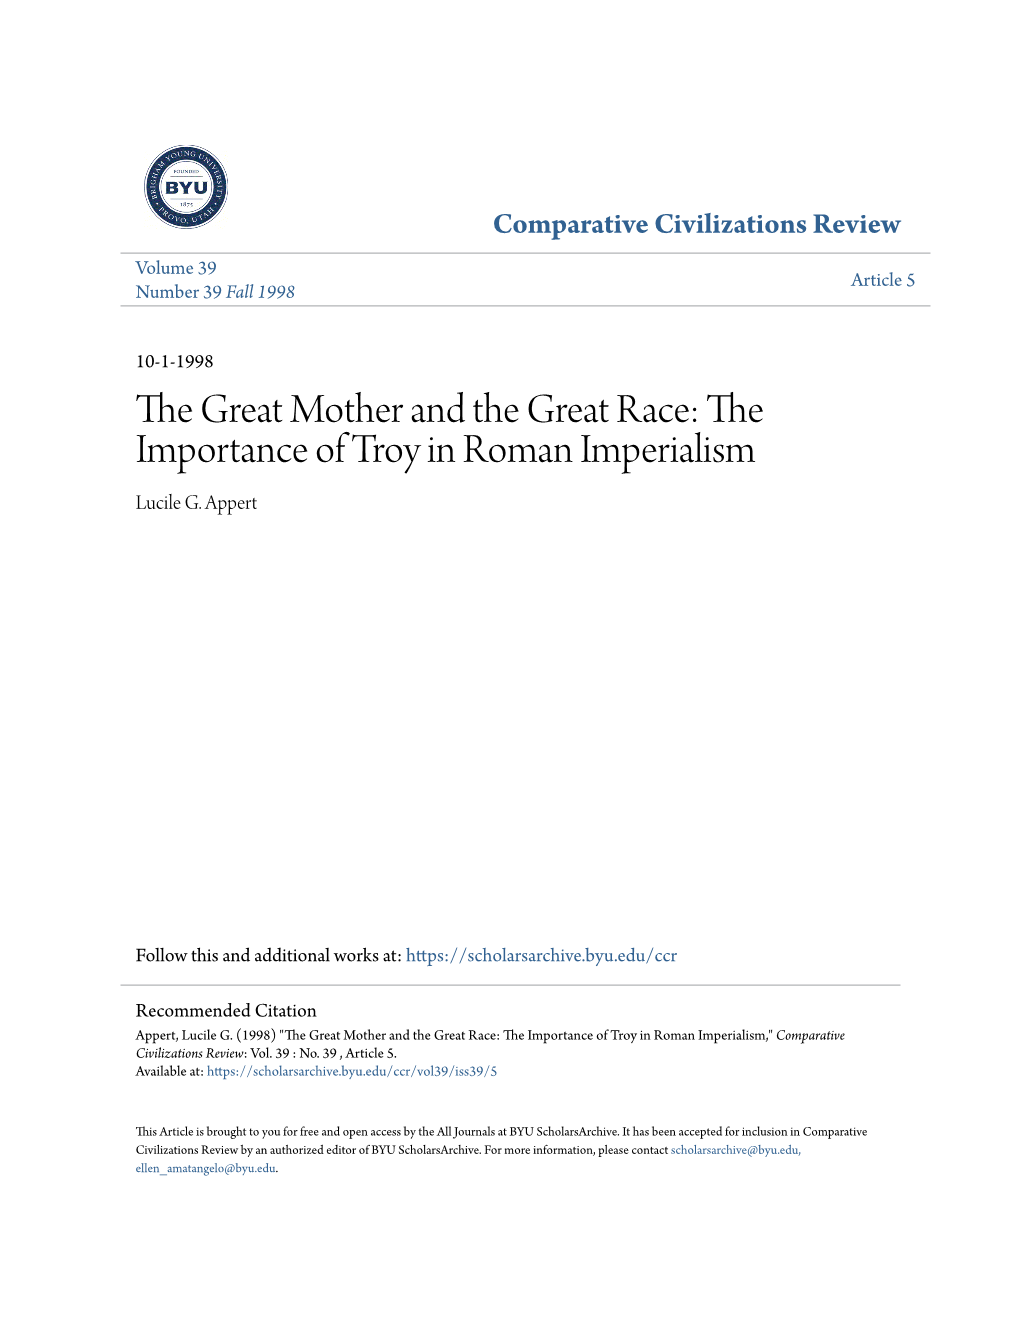 The Great Mother and the Great Race: the Importance of Troy in Roman Imperialism Lucile G